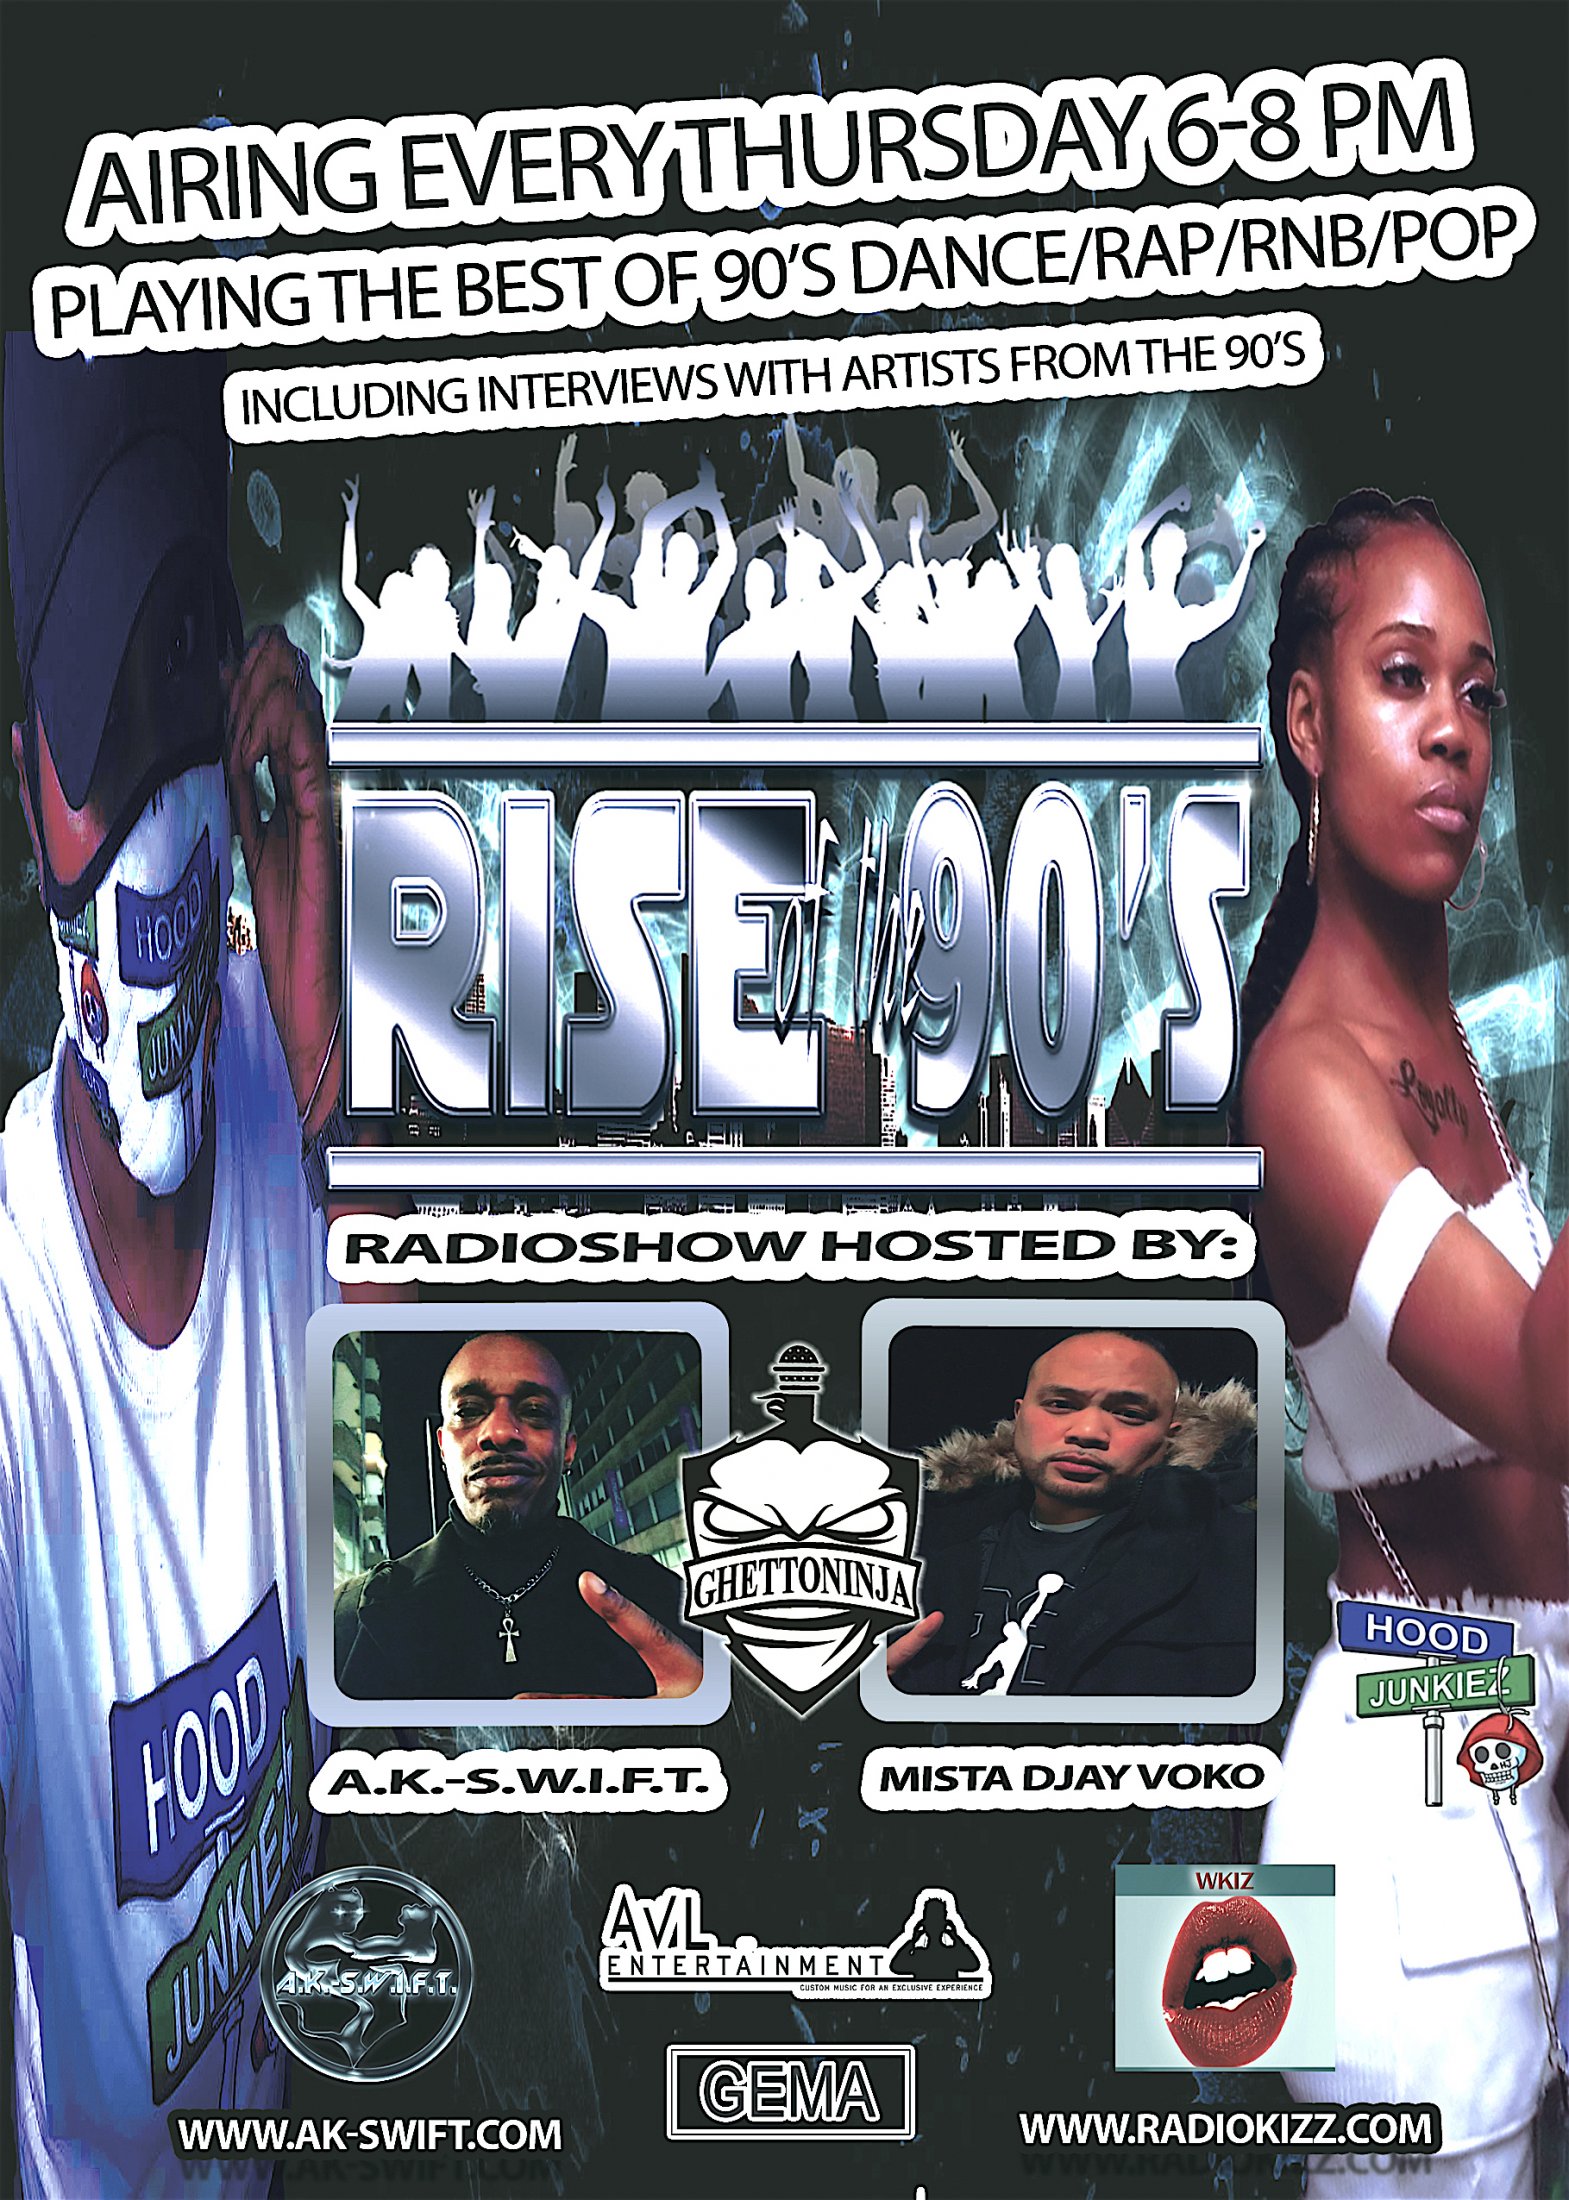 A.K and Voko Rise of the 90s Radioshow 2021